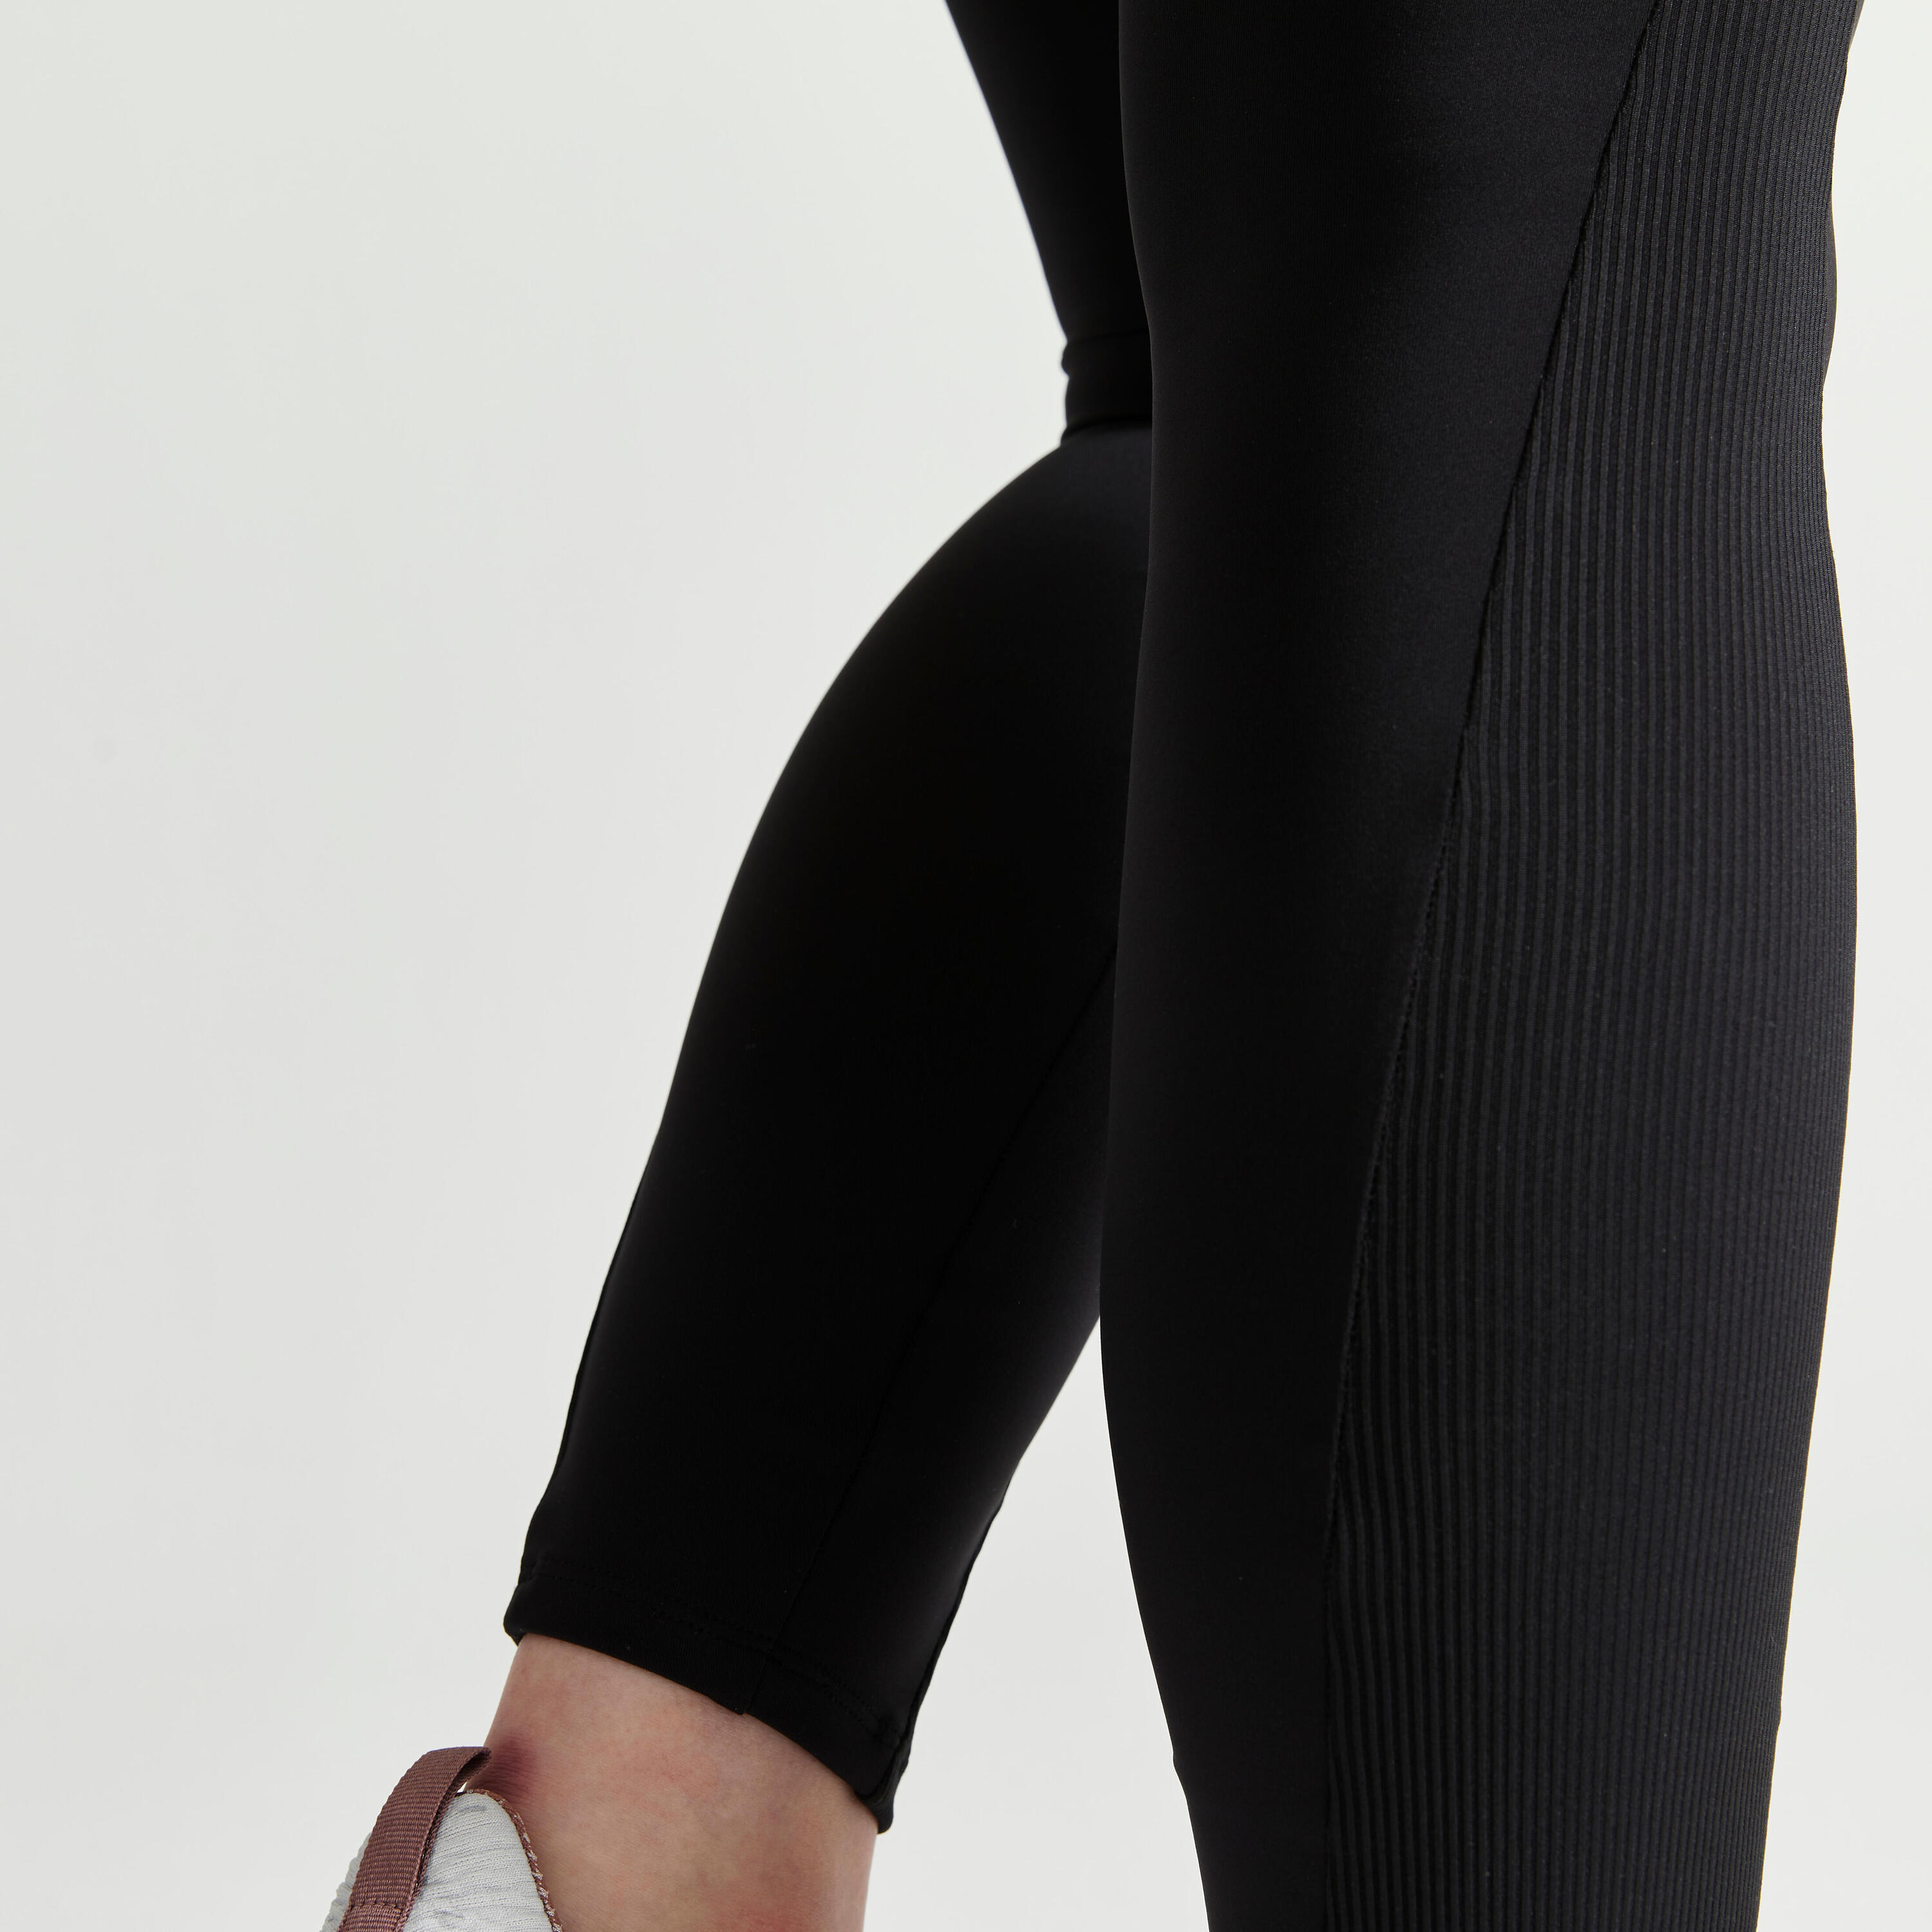 Women's High Waisted Fitness Cardio Leggings with Drawstring - Black 5/5